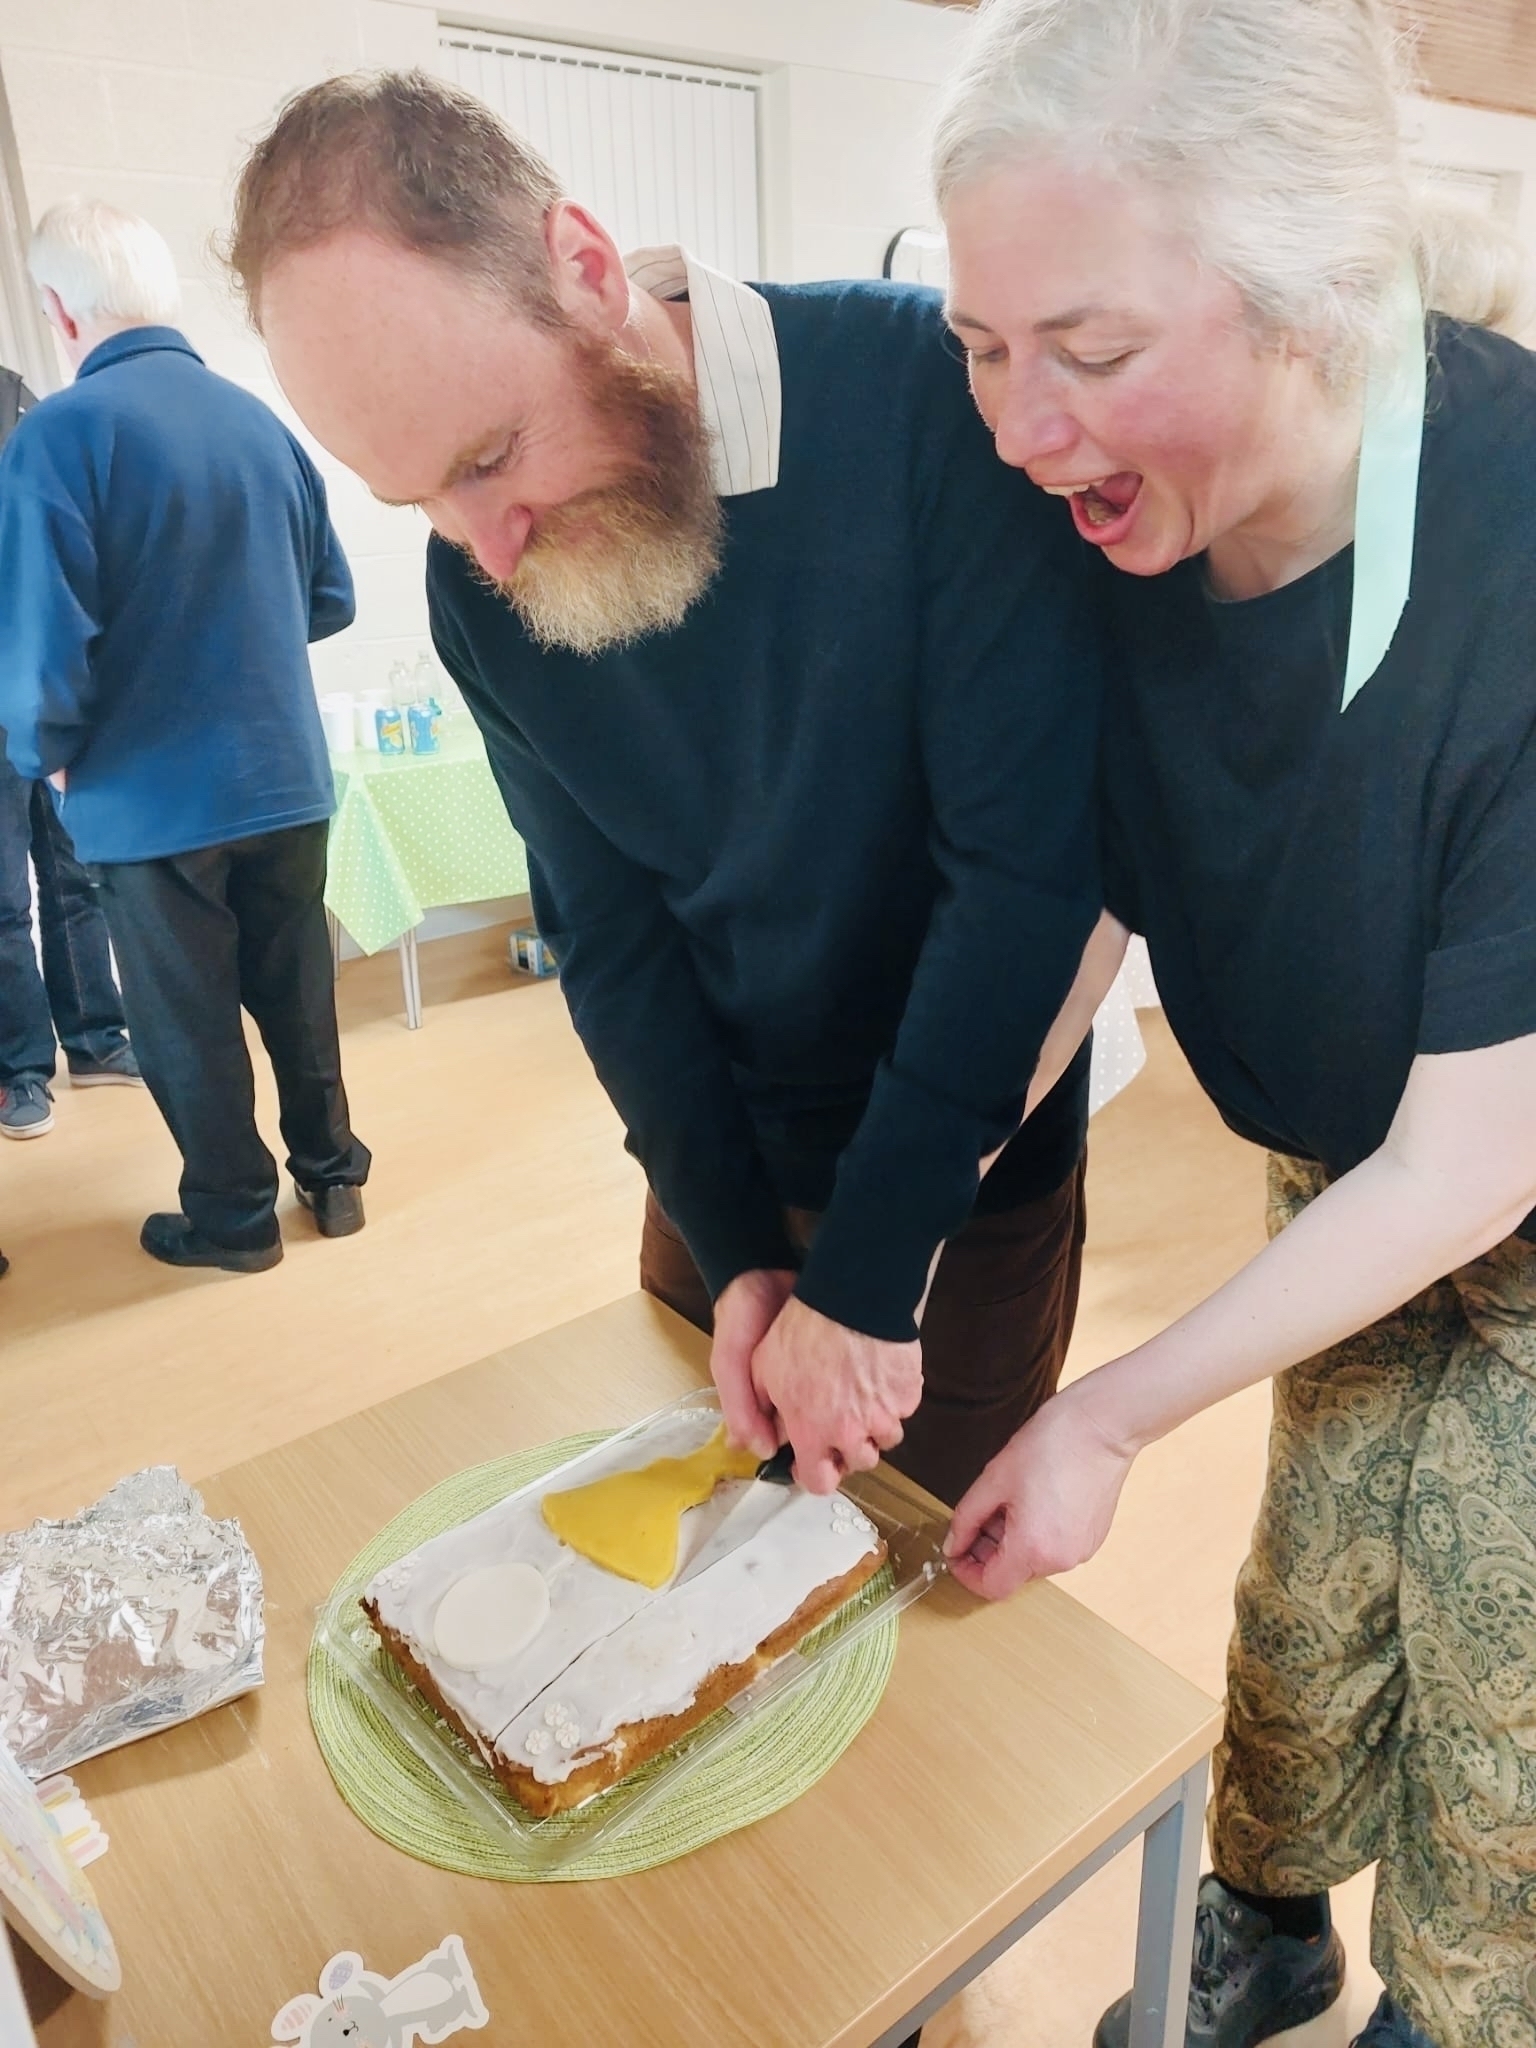 Holly and Simon cutting into a cake, happy and joyful